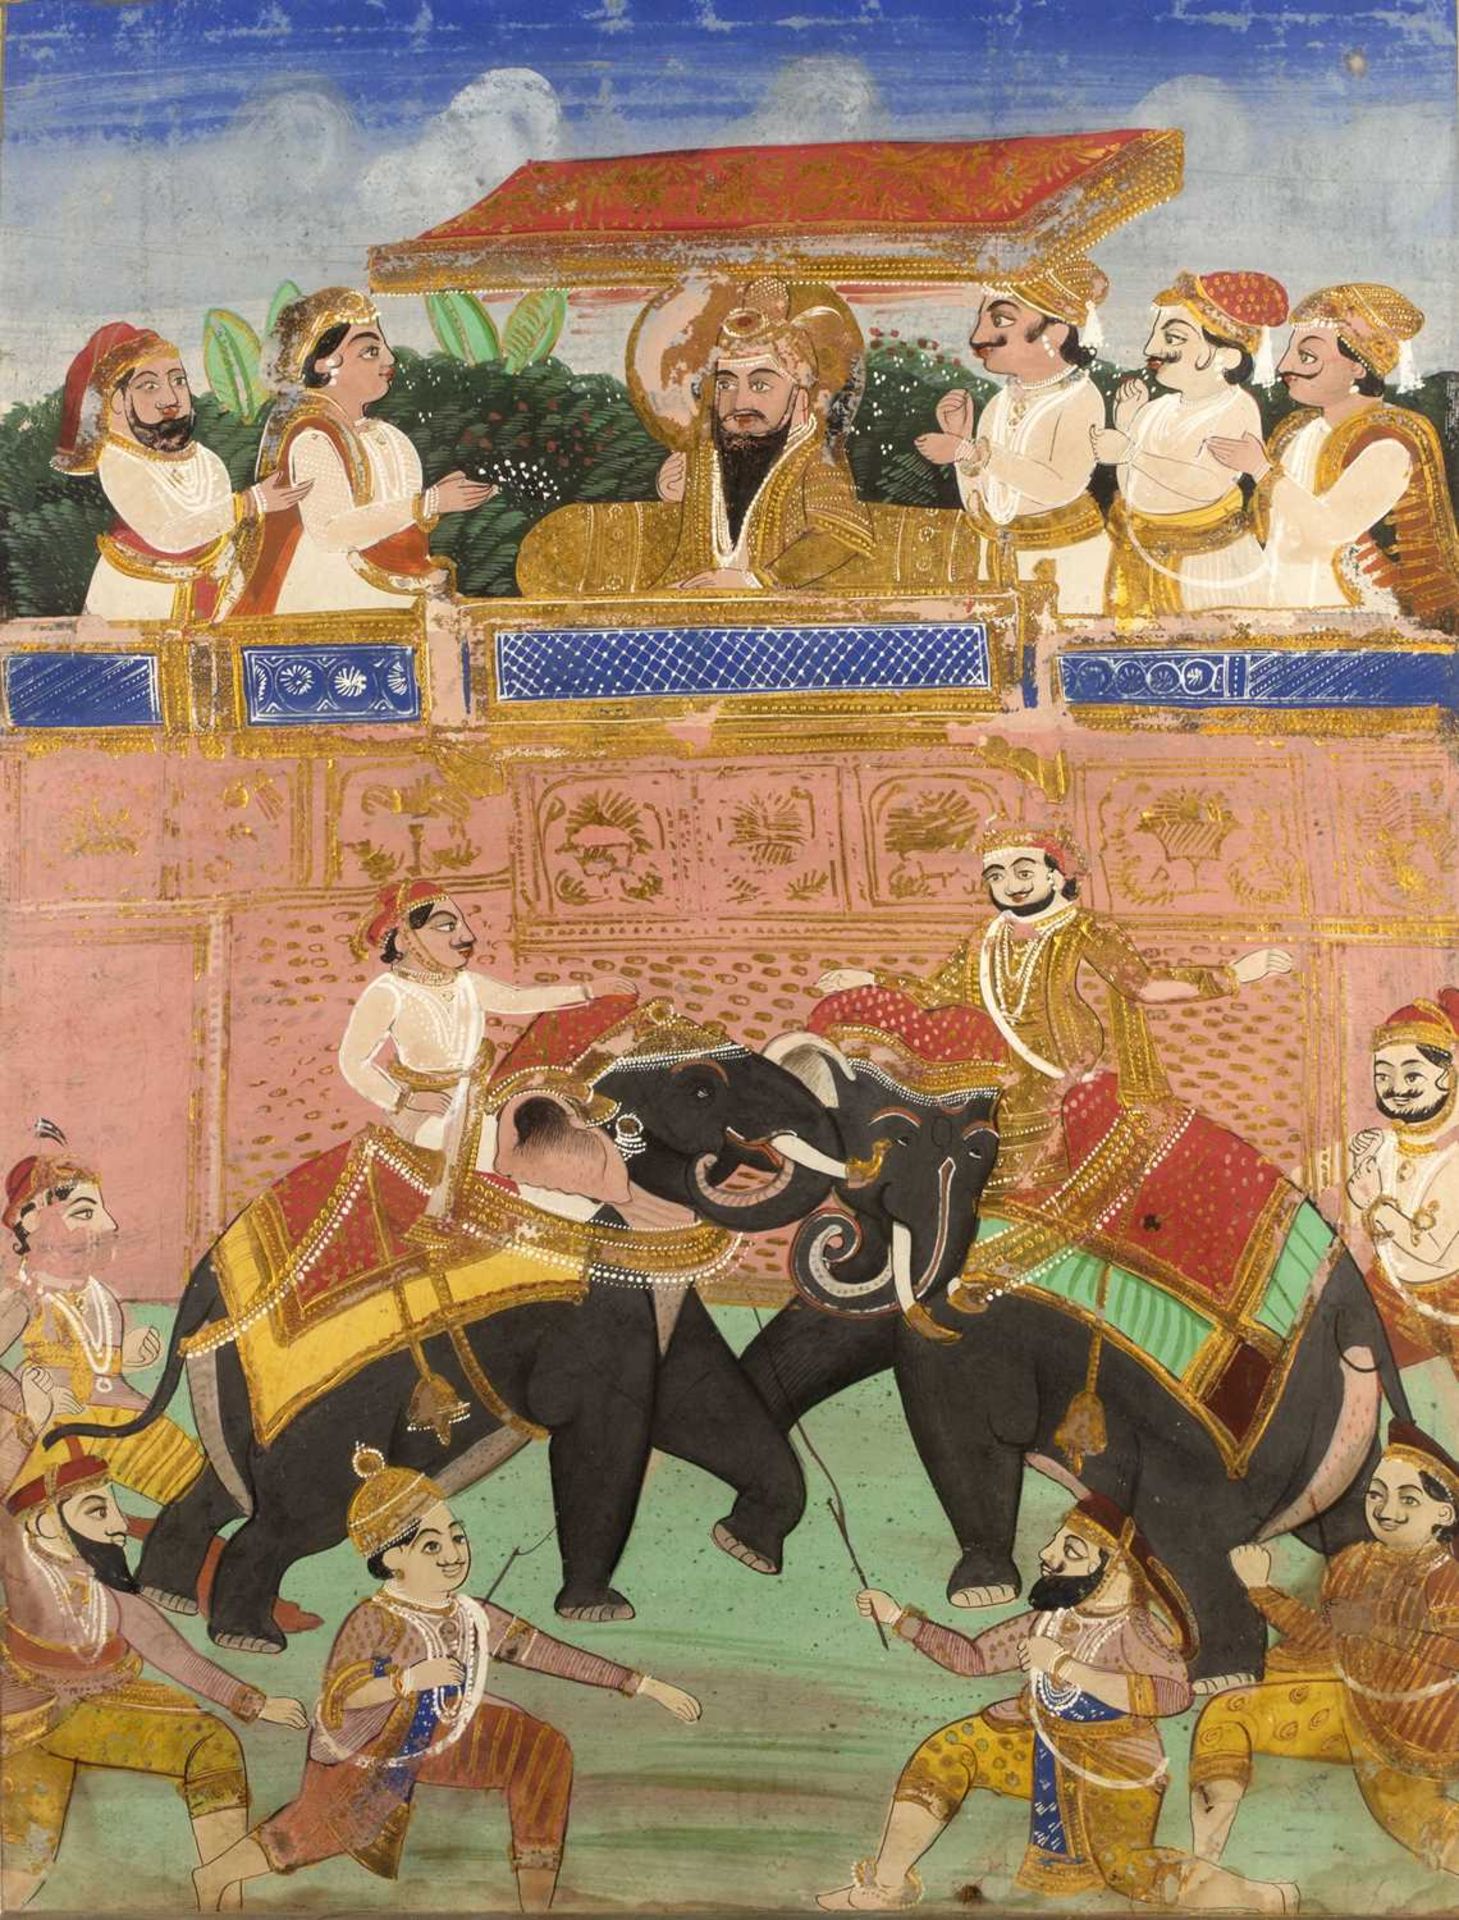 Elephant related pictures Indian, the first depicting Mohammed Adil Shah, Sultan of Bijapur and